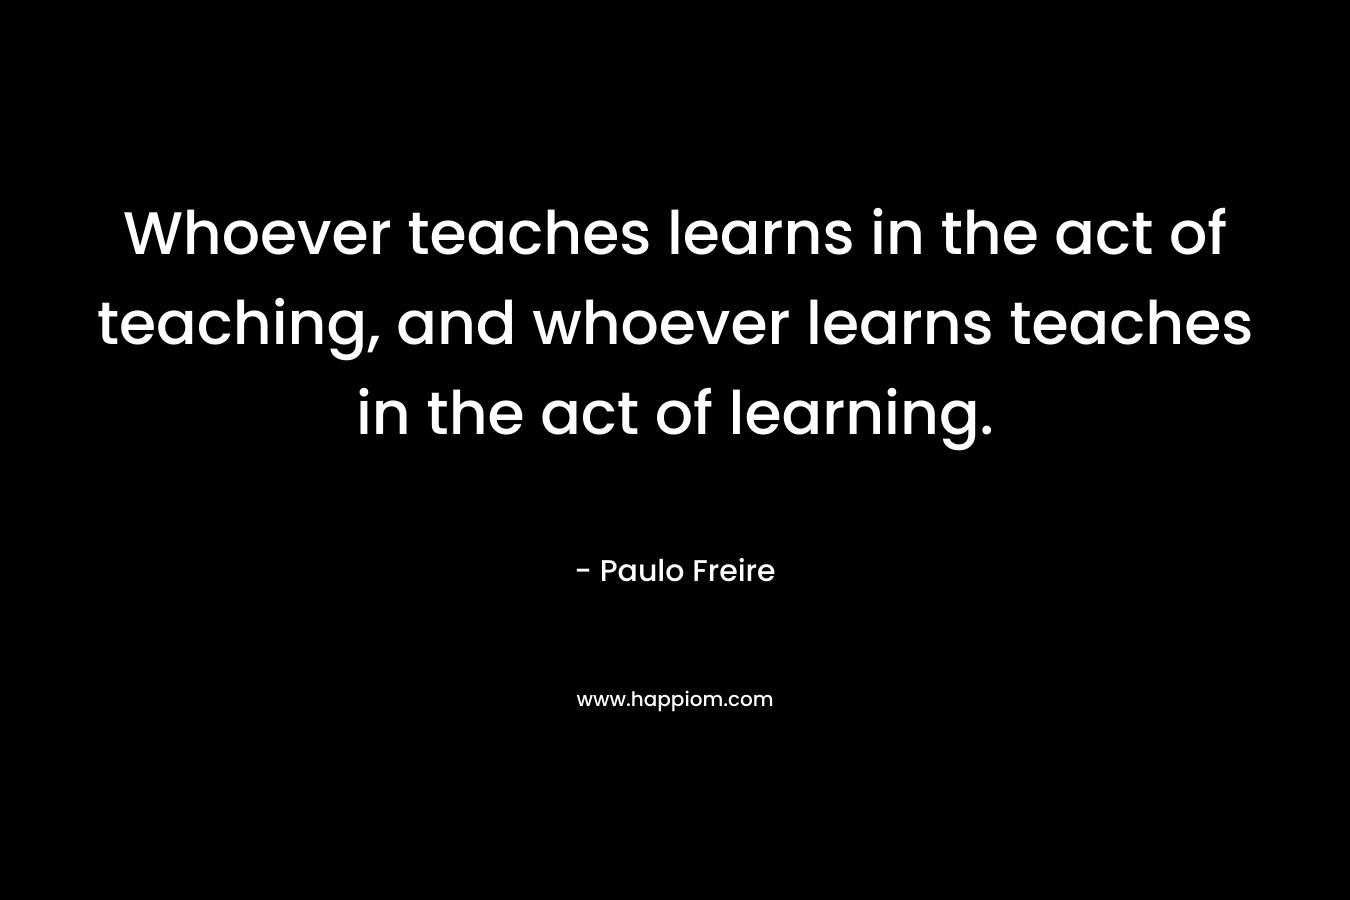 Whoever teaches learns in the act of teaching, and whoever learns teaches in the act of learning.